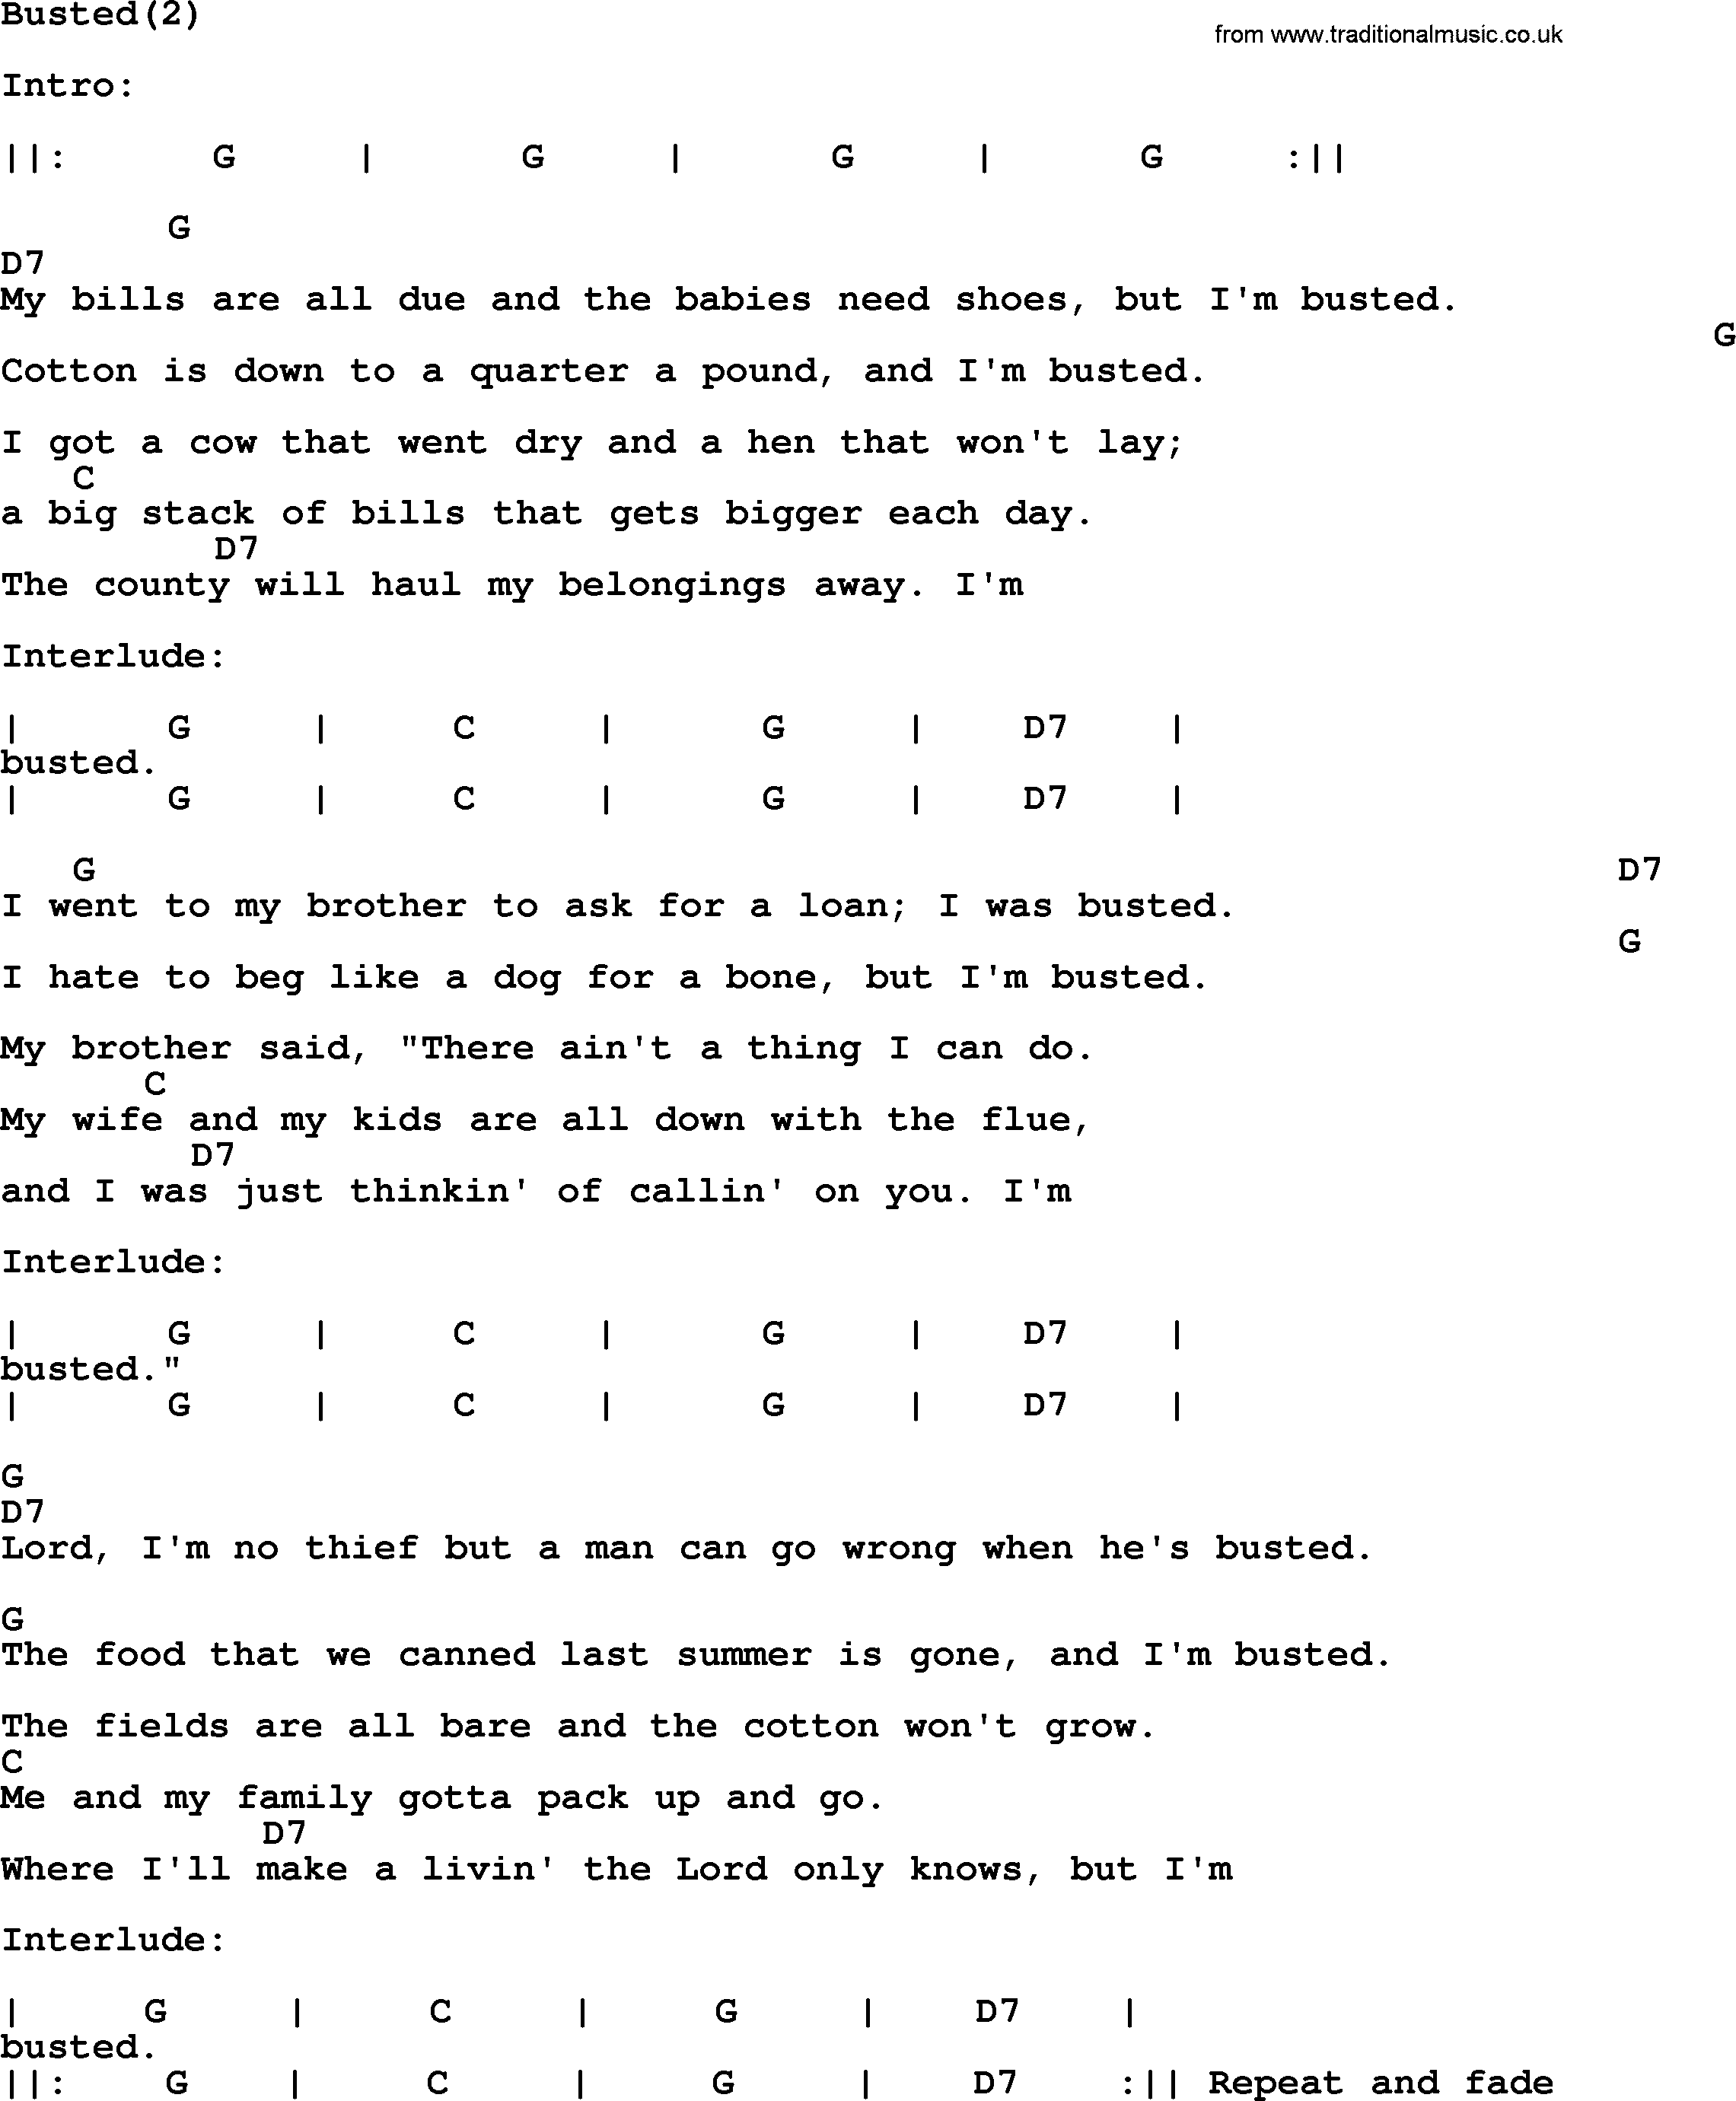 Johnny Cash song Busted(2), lyrics and chords